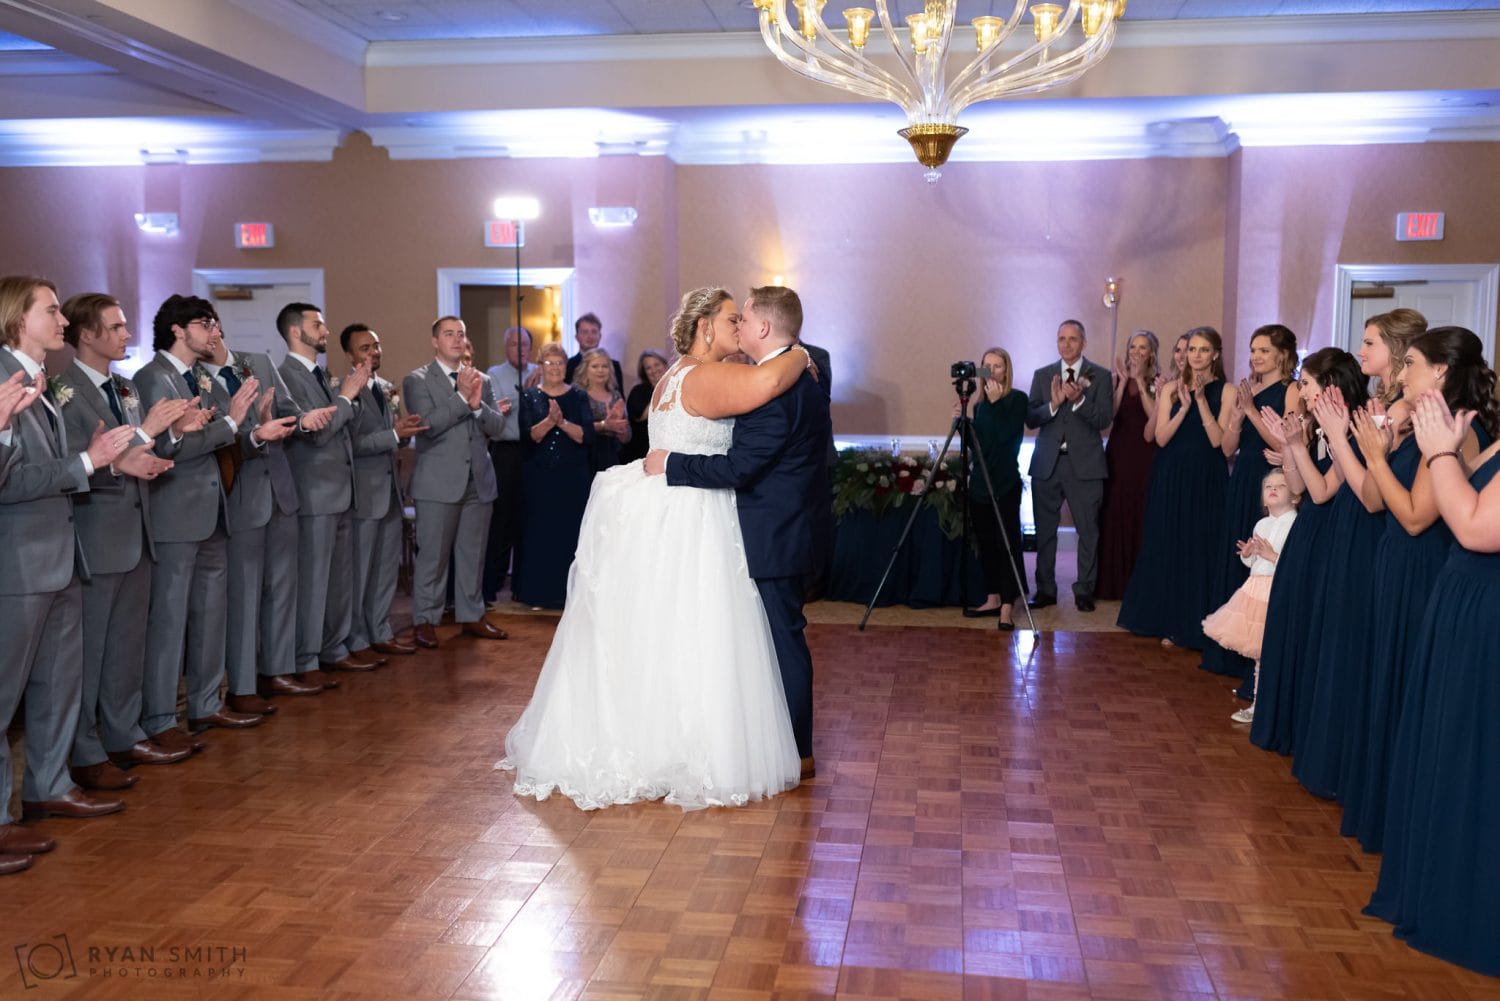 Kiss in the first dance